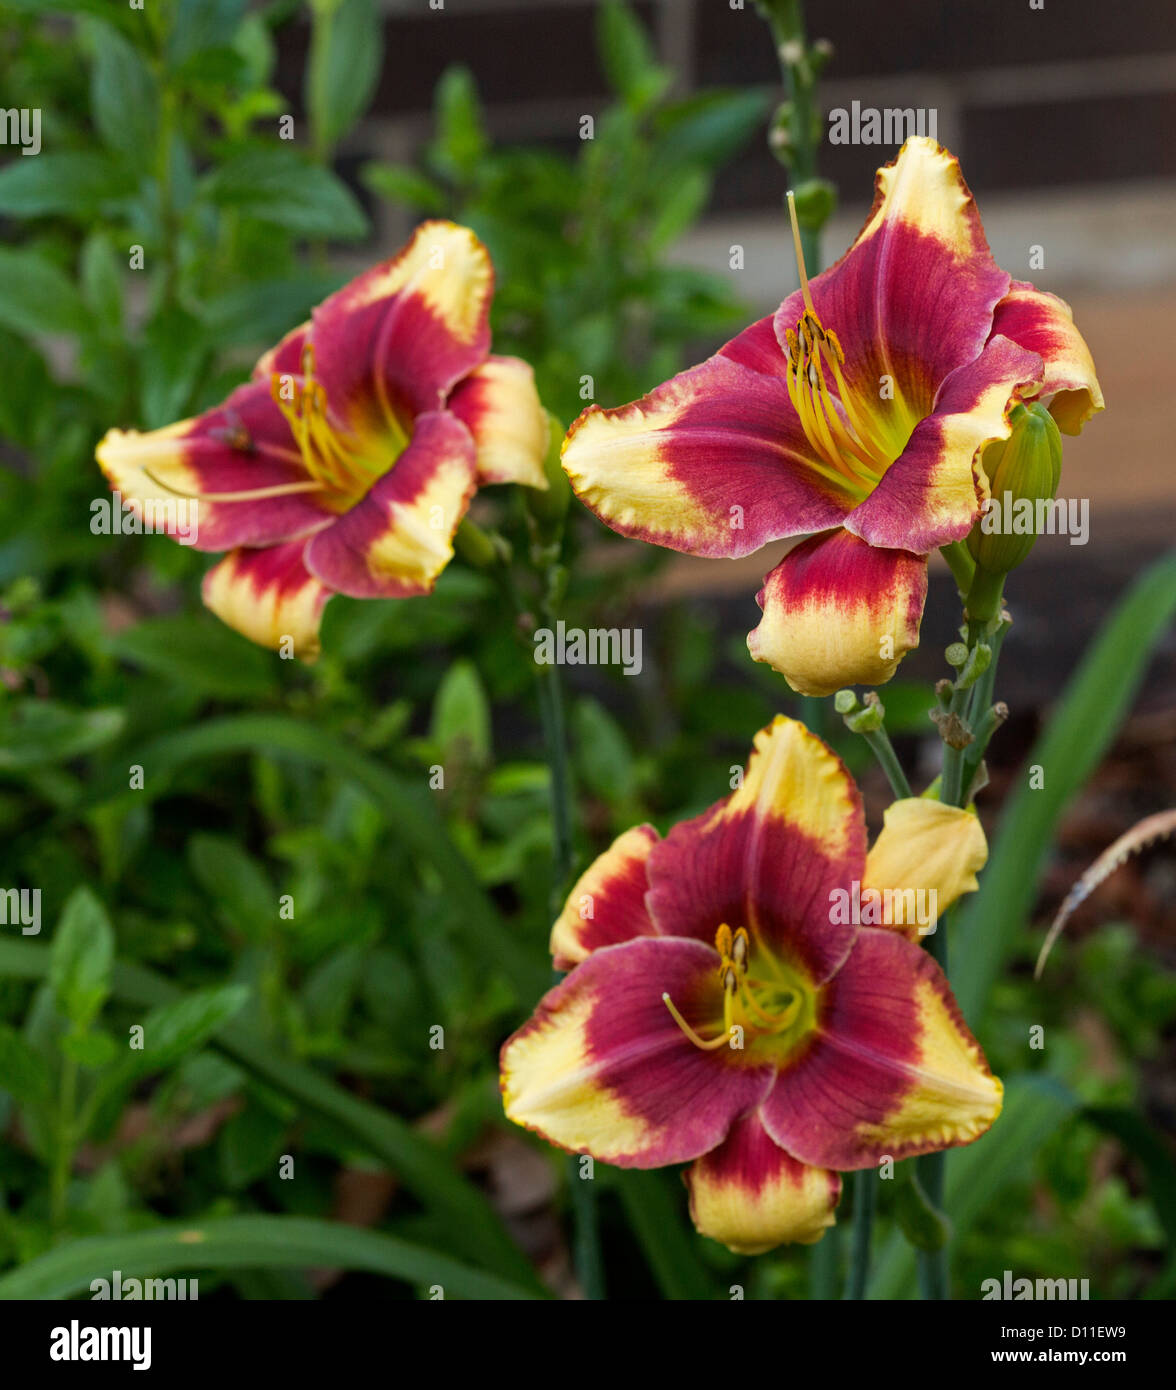 Cluster of dark red and yellow flowers of daylily, Hemerocallis 'Aragon', with emerald green leaves Stock Photo